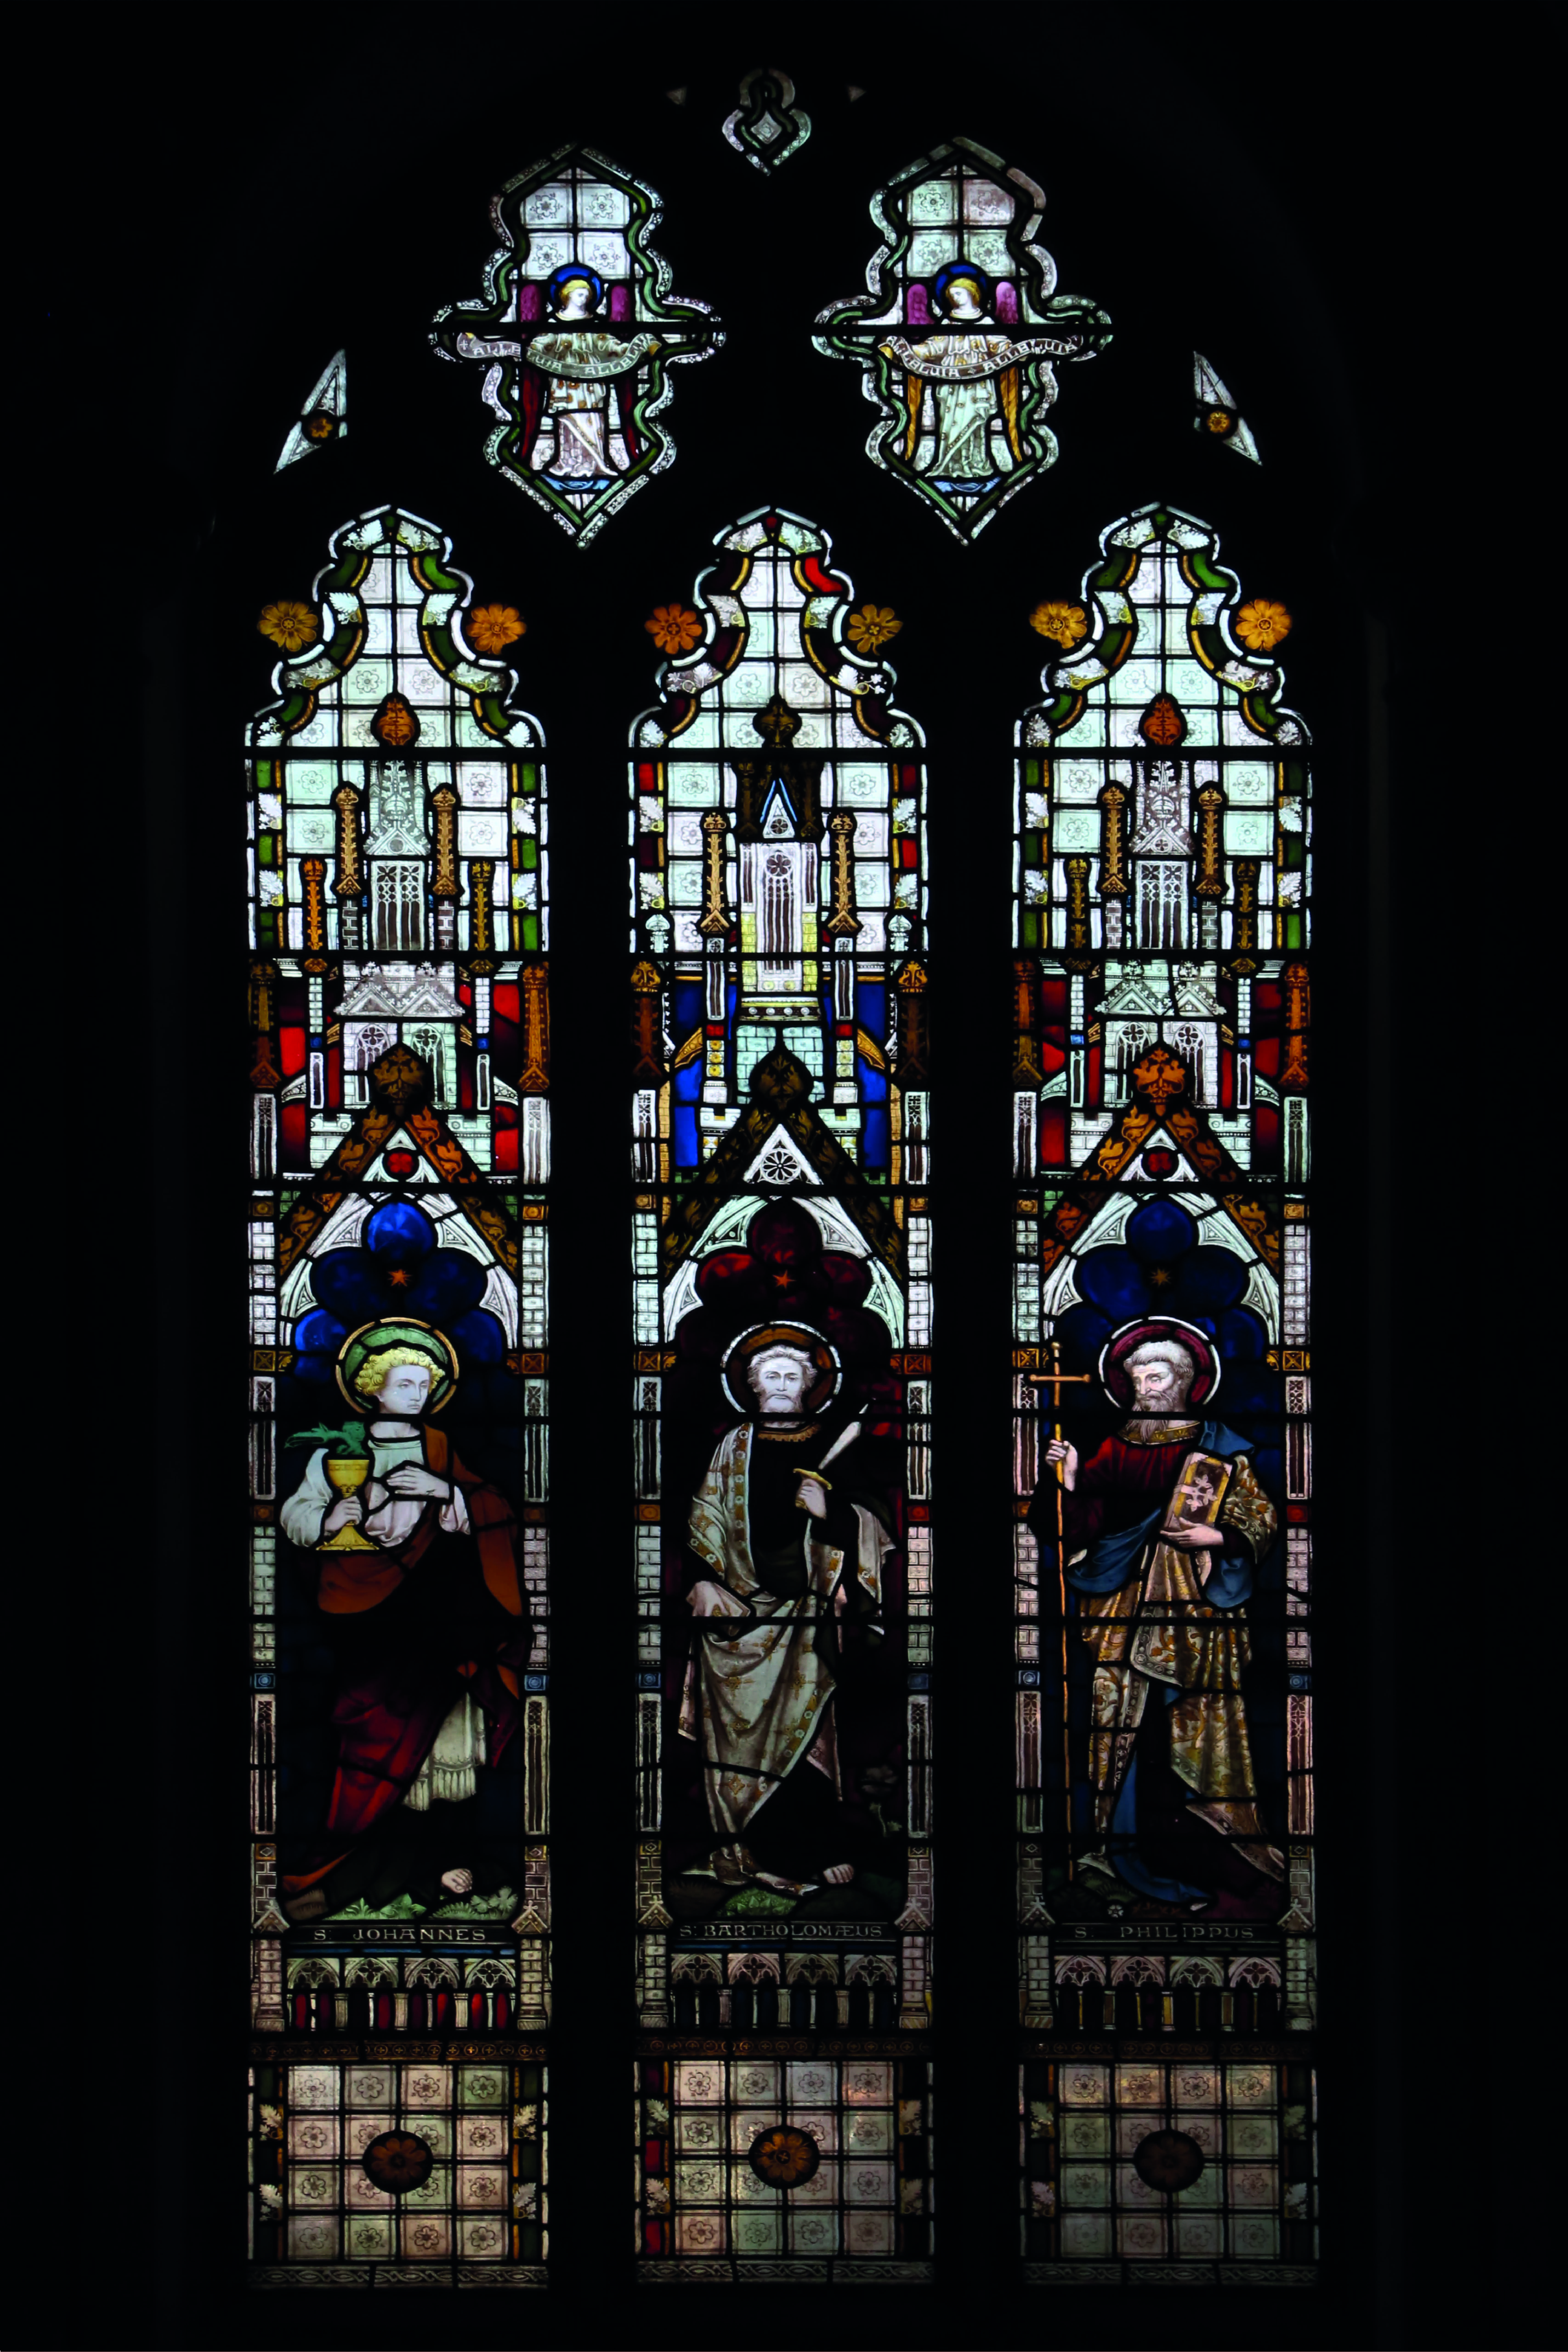 Photograph of the stained glass window dedicated to Alfred Smith.